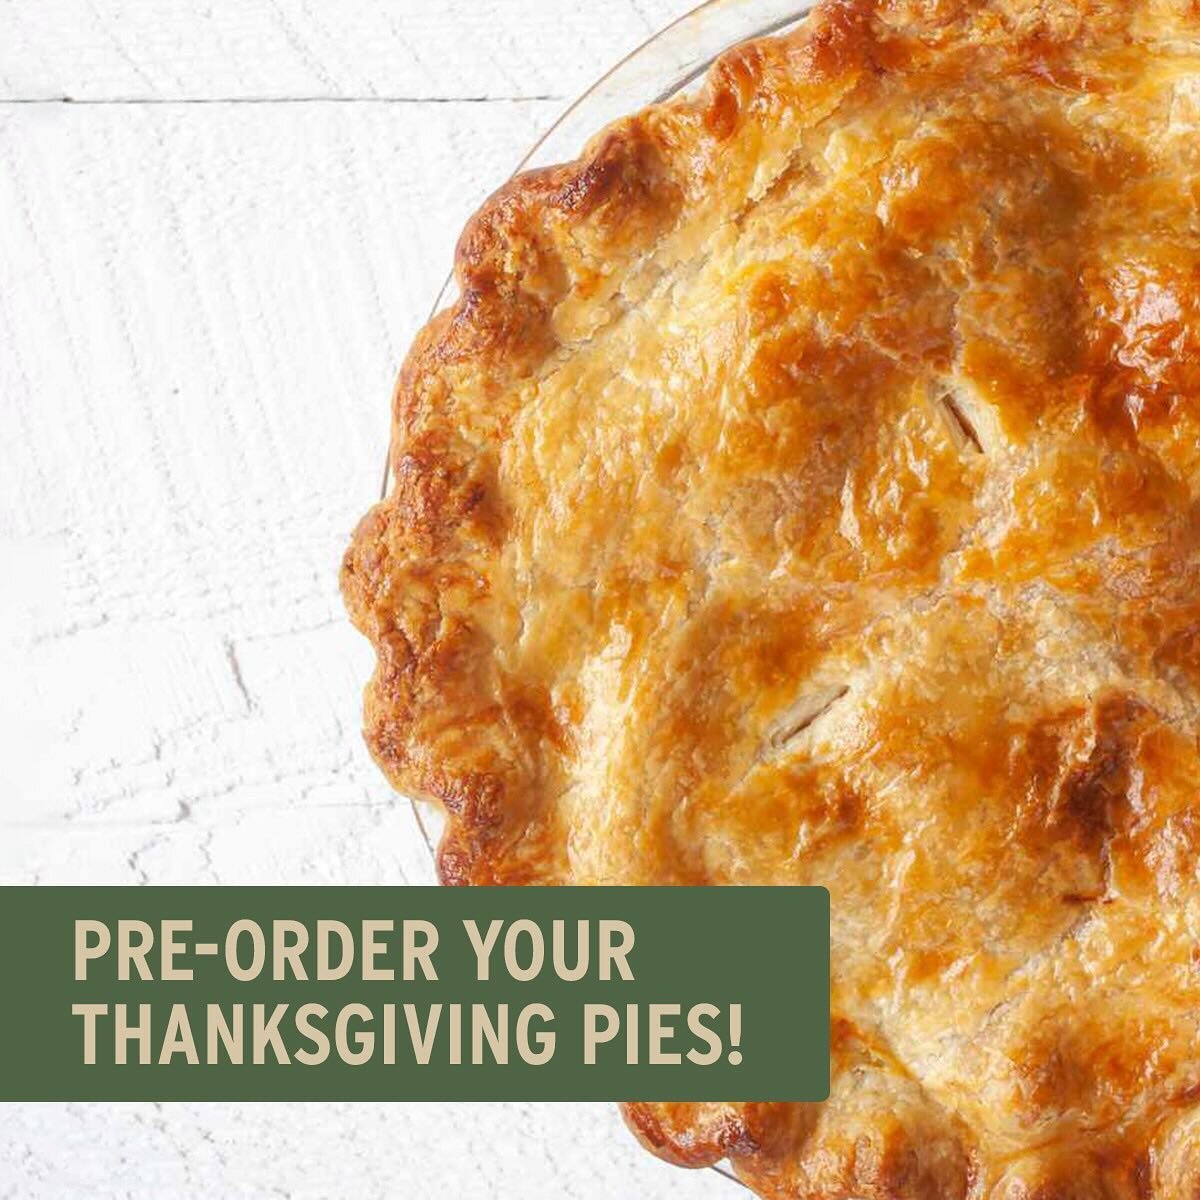 🥧 Get ready for a delicious Thanksgiving! 🦃 Pre-order your choice of Apple Pie or Pumpkin Pie for just $13.50 each.

📞 To place your order, call us at 518-203-6739.

📅 Pick up your freshly baked pies on either Tuesday or Wednesday before Thanksgi